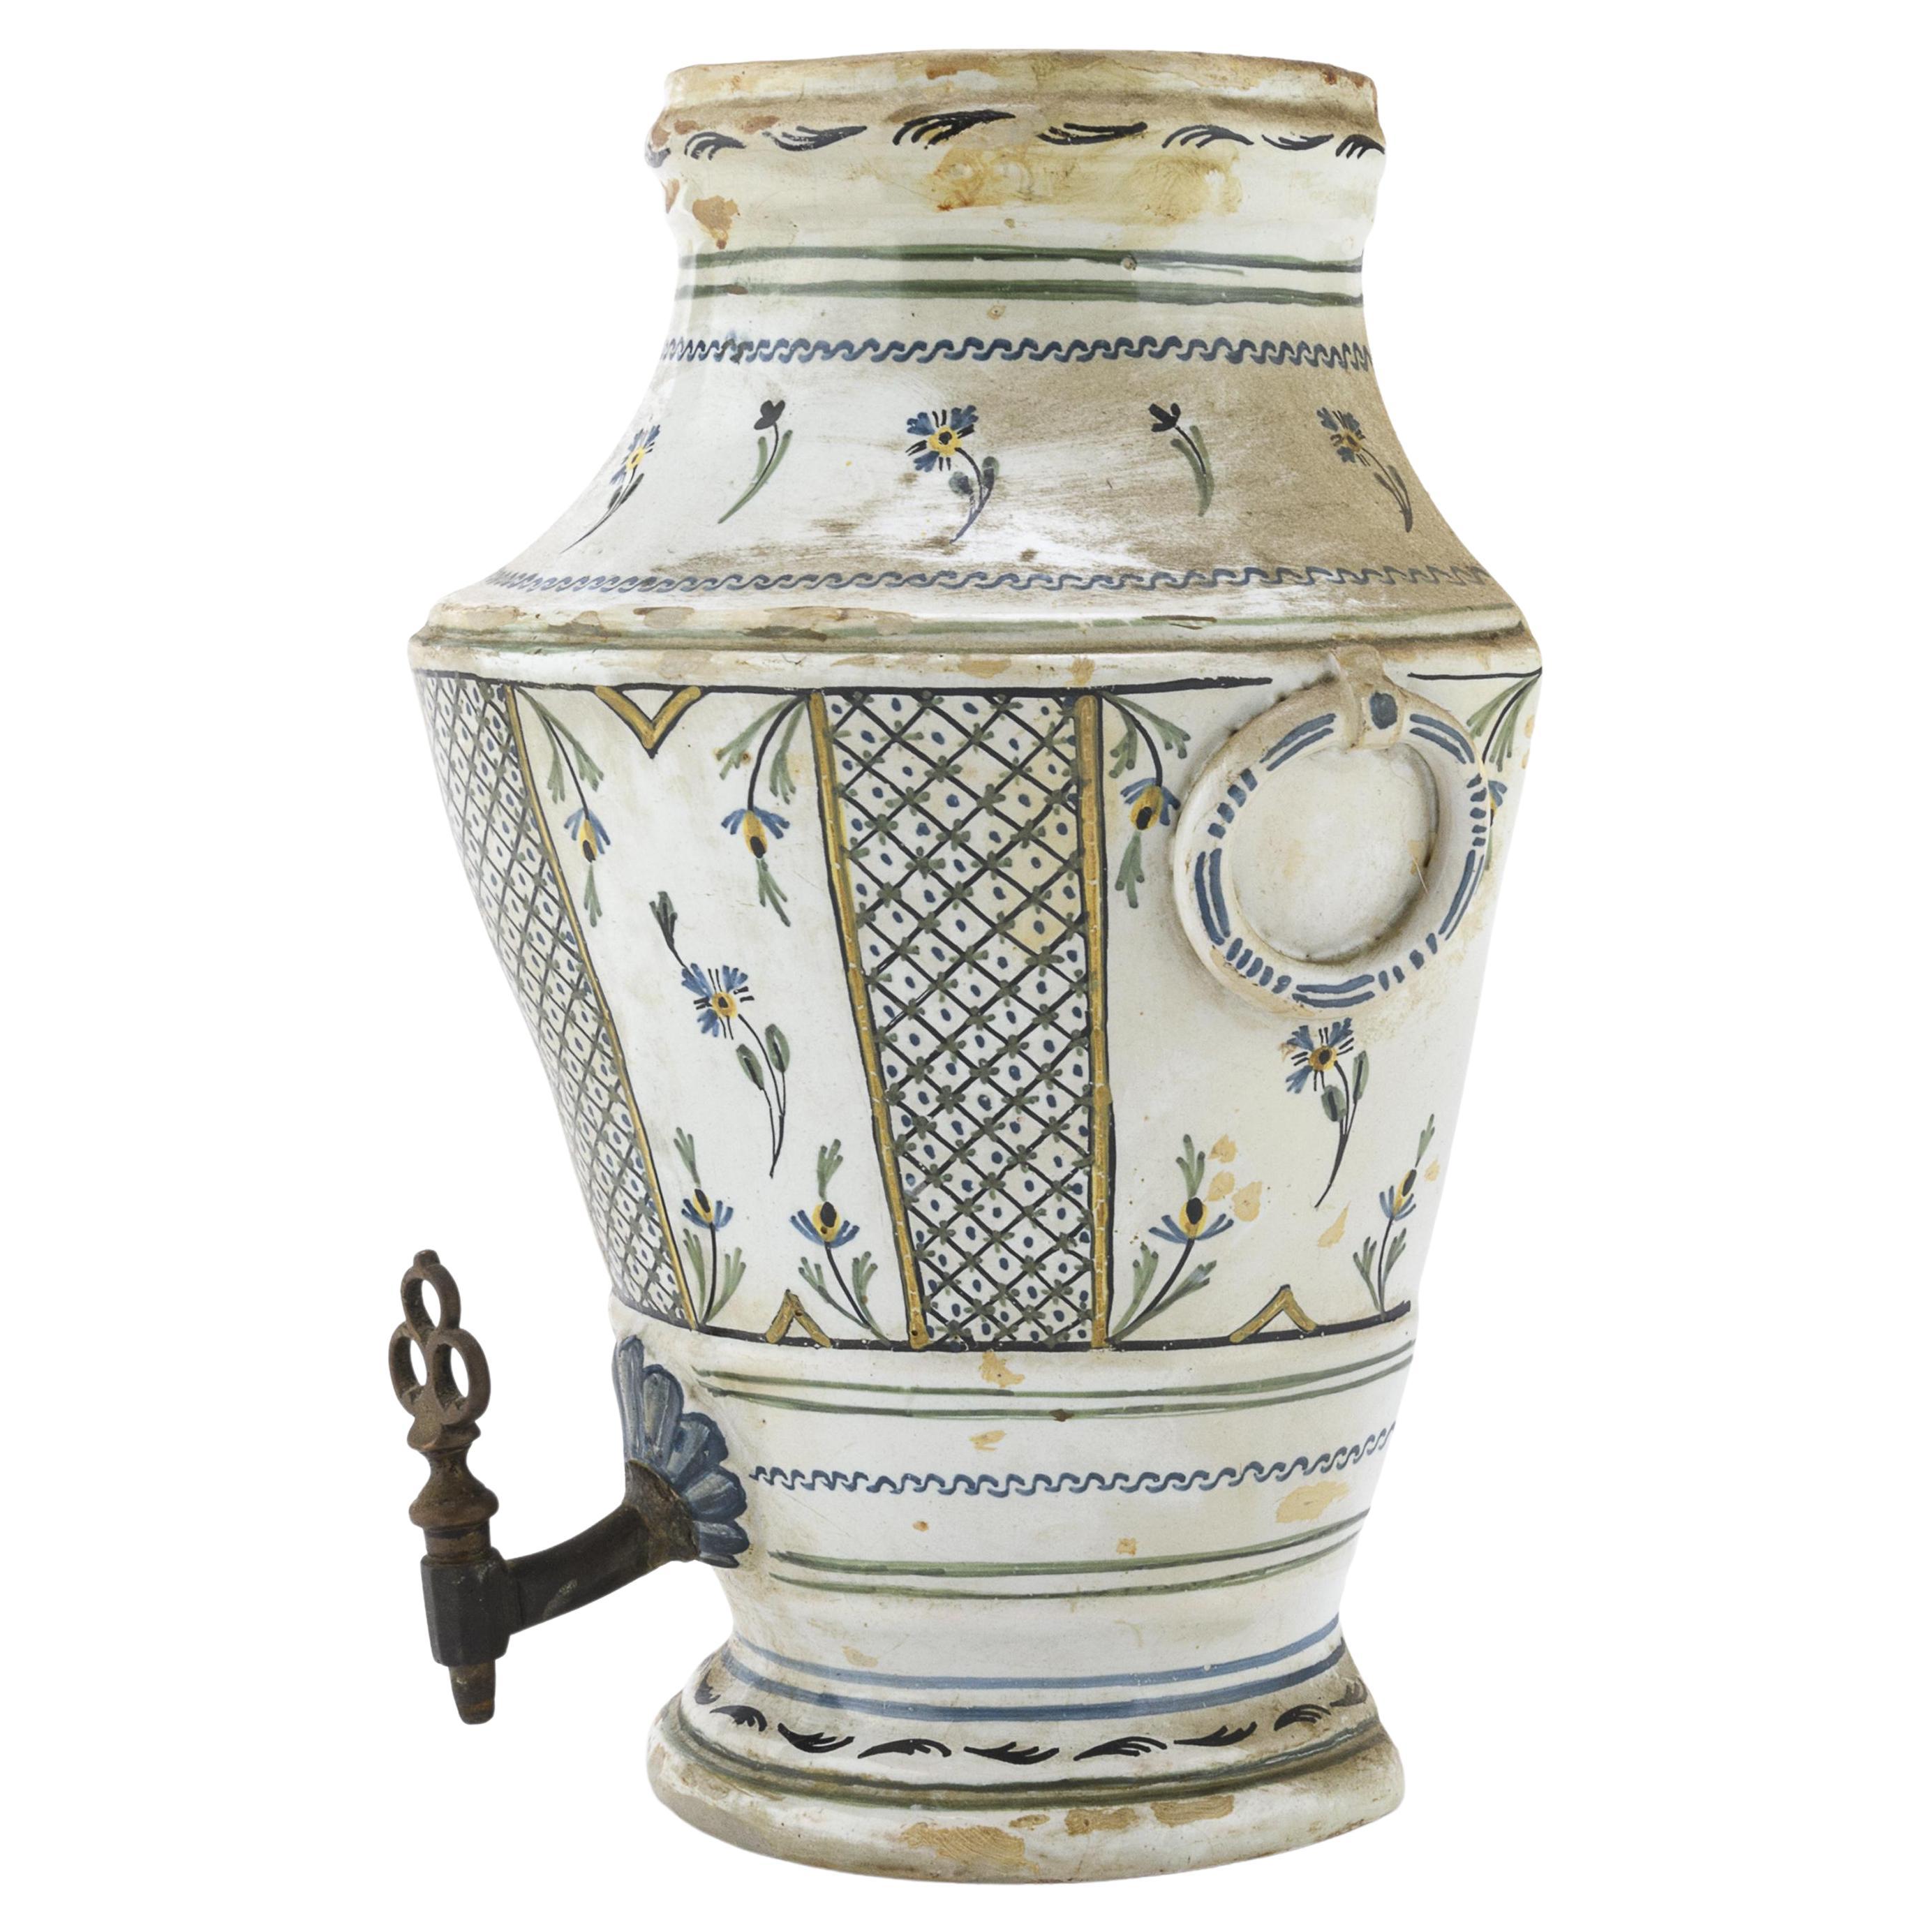 A Rustic European 18th century French faience fountain with spigot For Sale